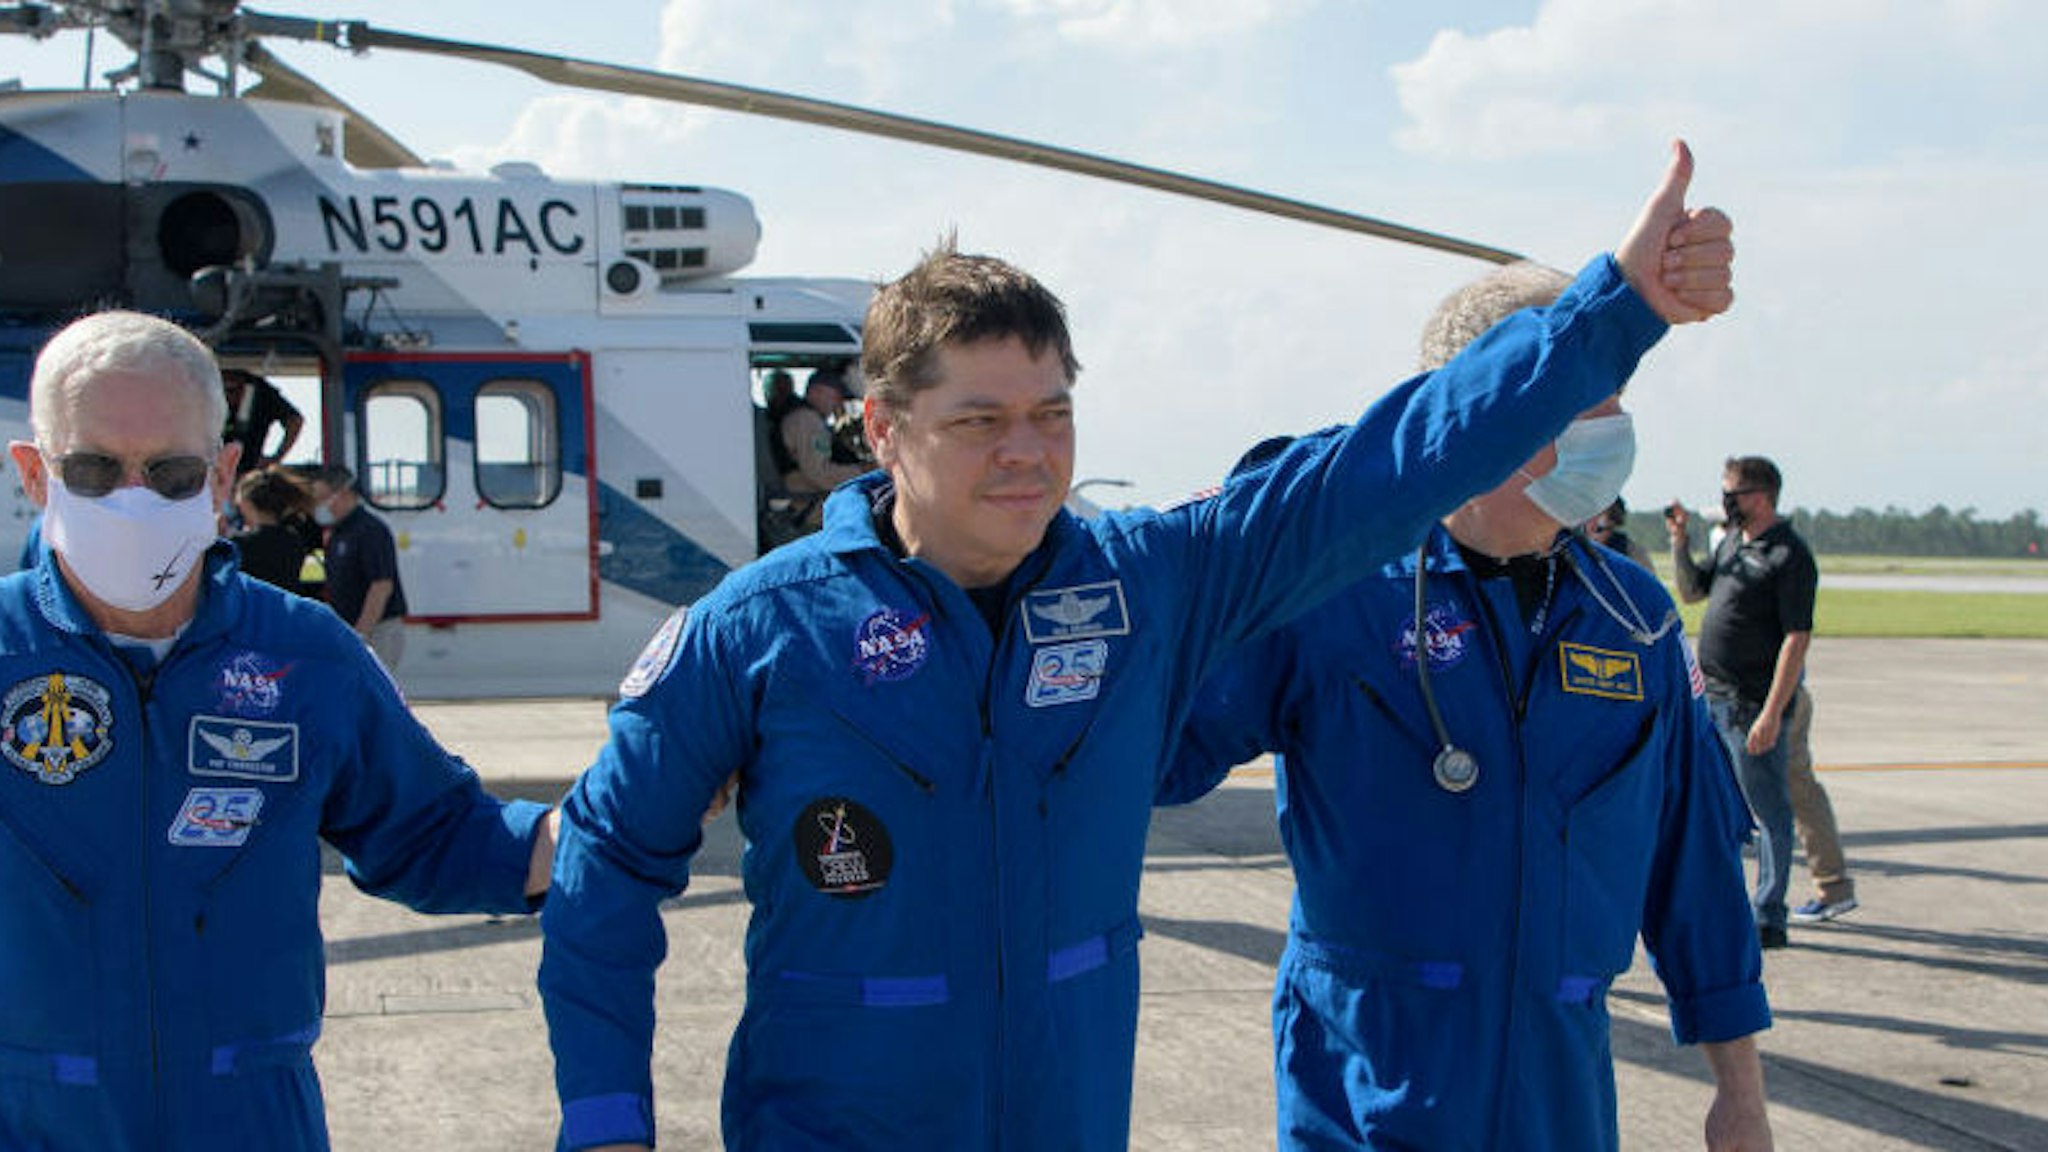 NASA astronaut Robert Behnken gives a thumbs up to onlookers as he boards a plane at Naval Air Station Pensacola to return him and NASA astronaut Douglas Hurley home to Houston a few hours after the duo landed in their SpaceX Crew Dragon Endeavour spacecraft off the coast of Pensacola, Florida, Sunday, Aug. 2, 2020. The Demo-2 test flight for NASA's Commercial Crew Program was the first to deliver astronauts to the International Space Station and return them safely to Earth onboard a commercially built and operated spacecraft. Behnken and Hurley returned after spending 64 days in space.